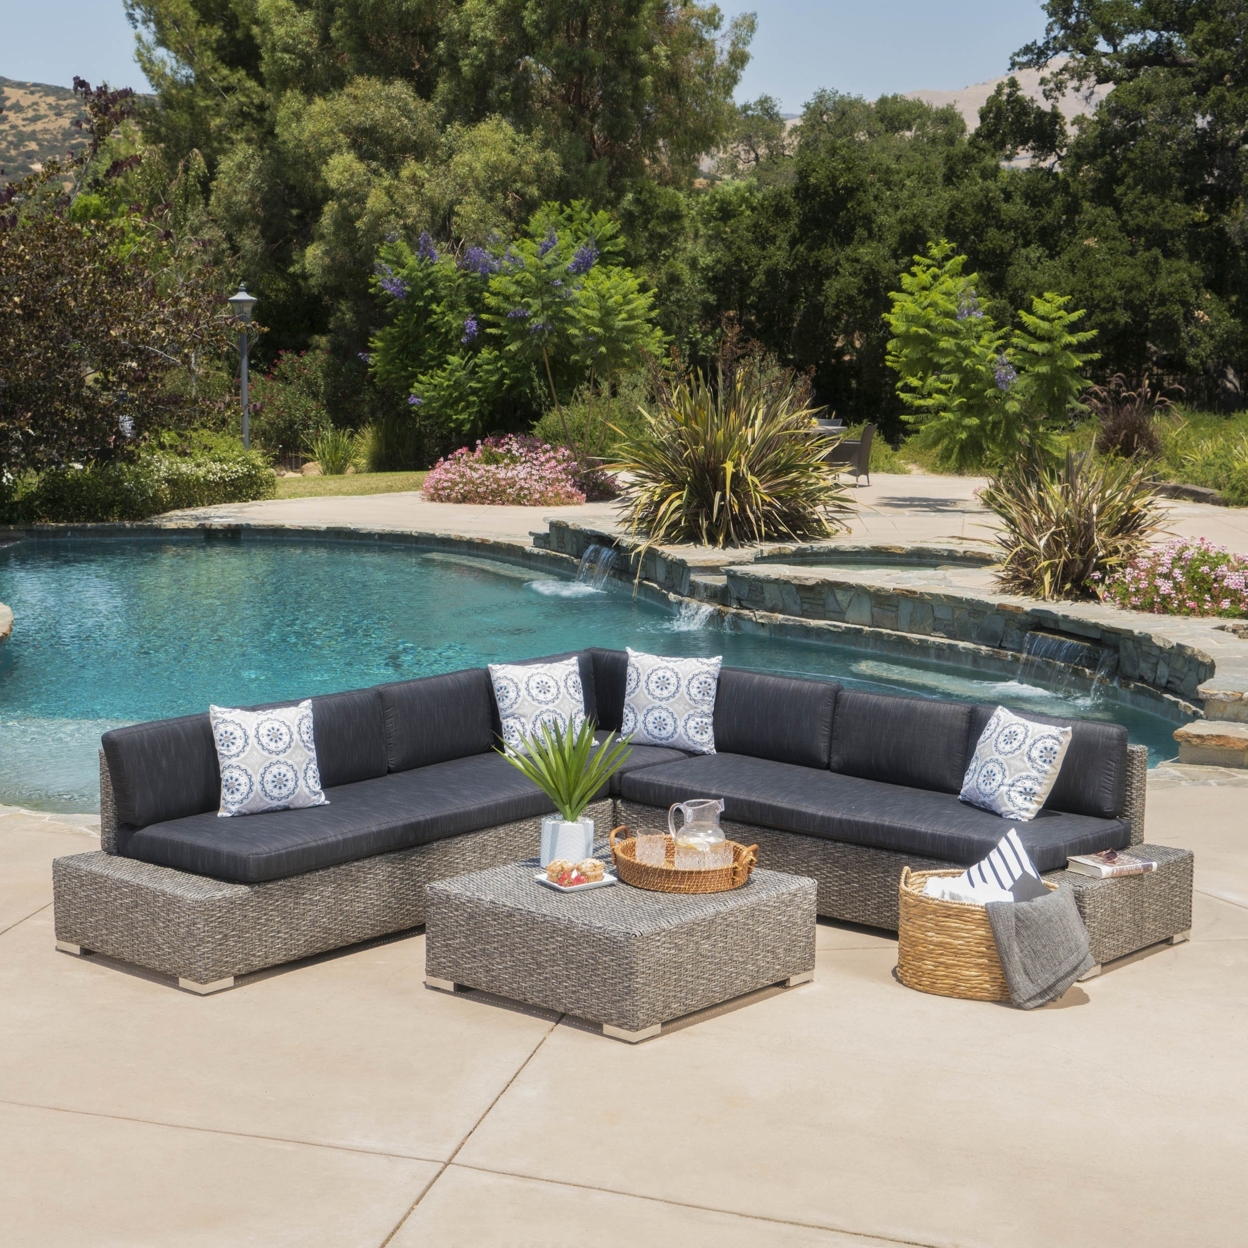 Pueblo Outdoor 7 Seat Wicker V Shaped Sectional Sofa With Water Resistant Cushions